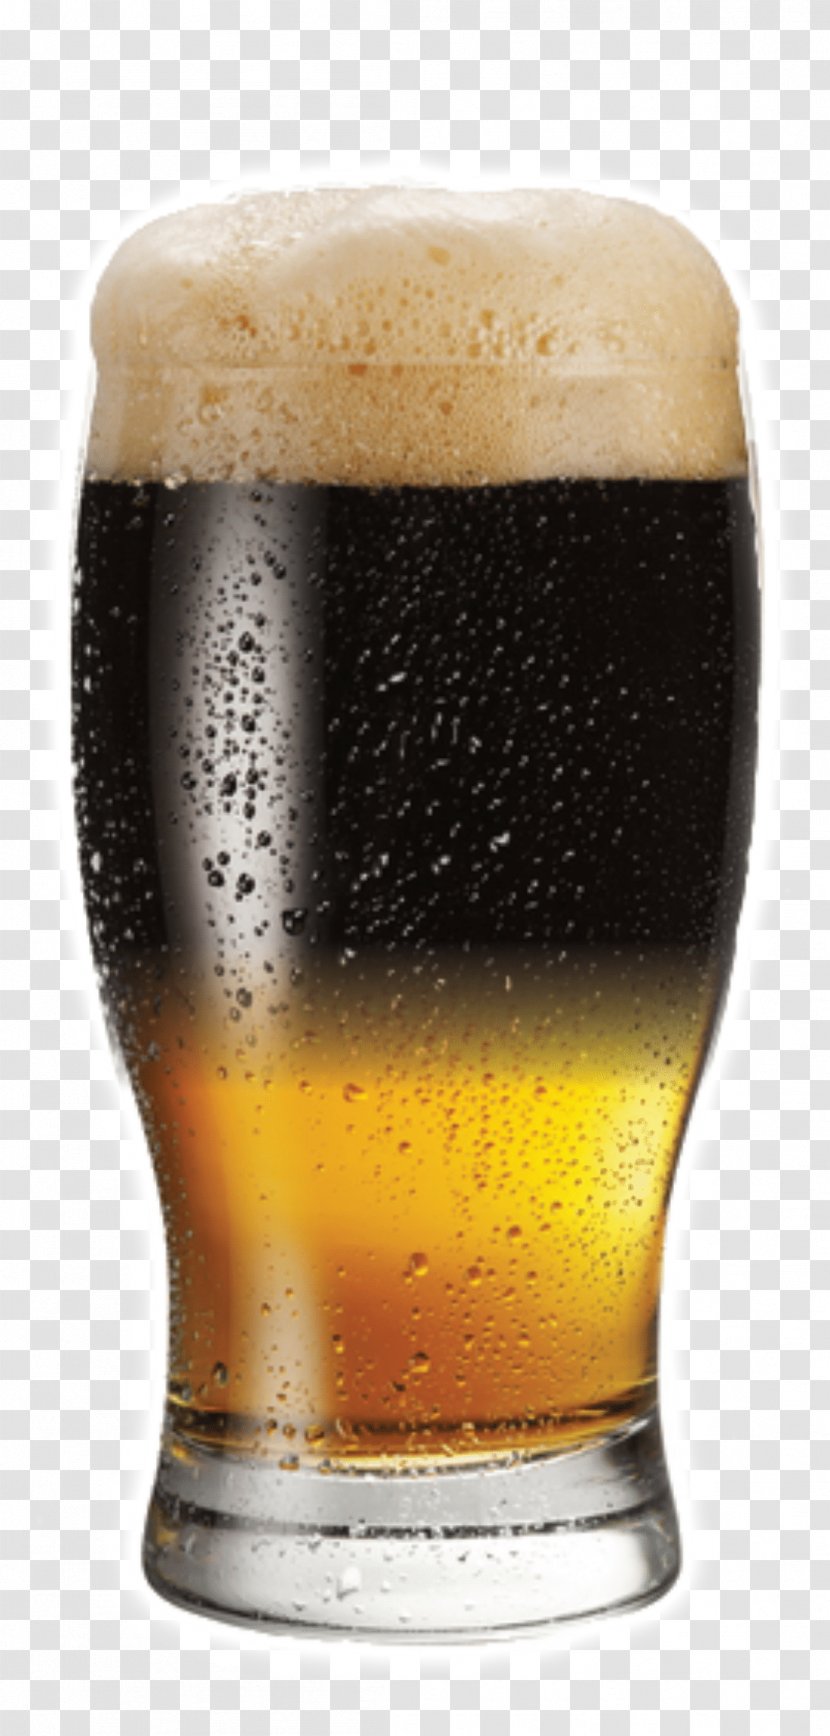 Wheat Beer Cocktail Black And Tan Guinness - Pint - Splash Transparent PNG